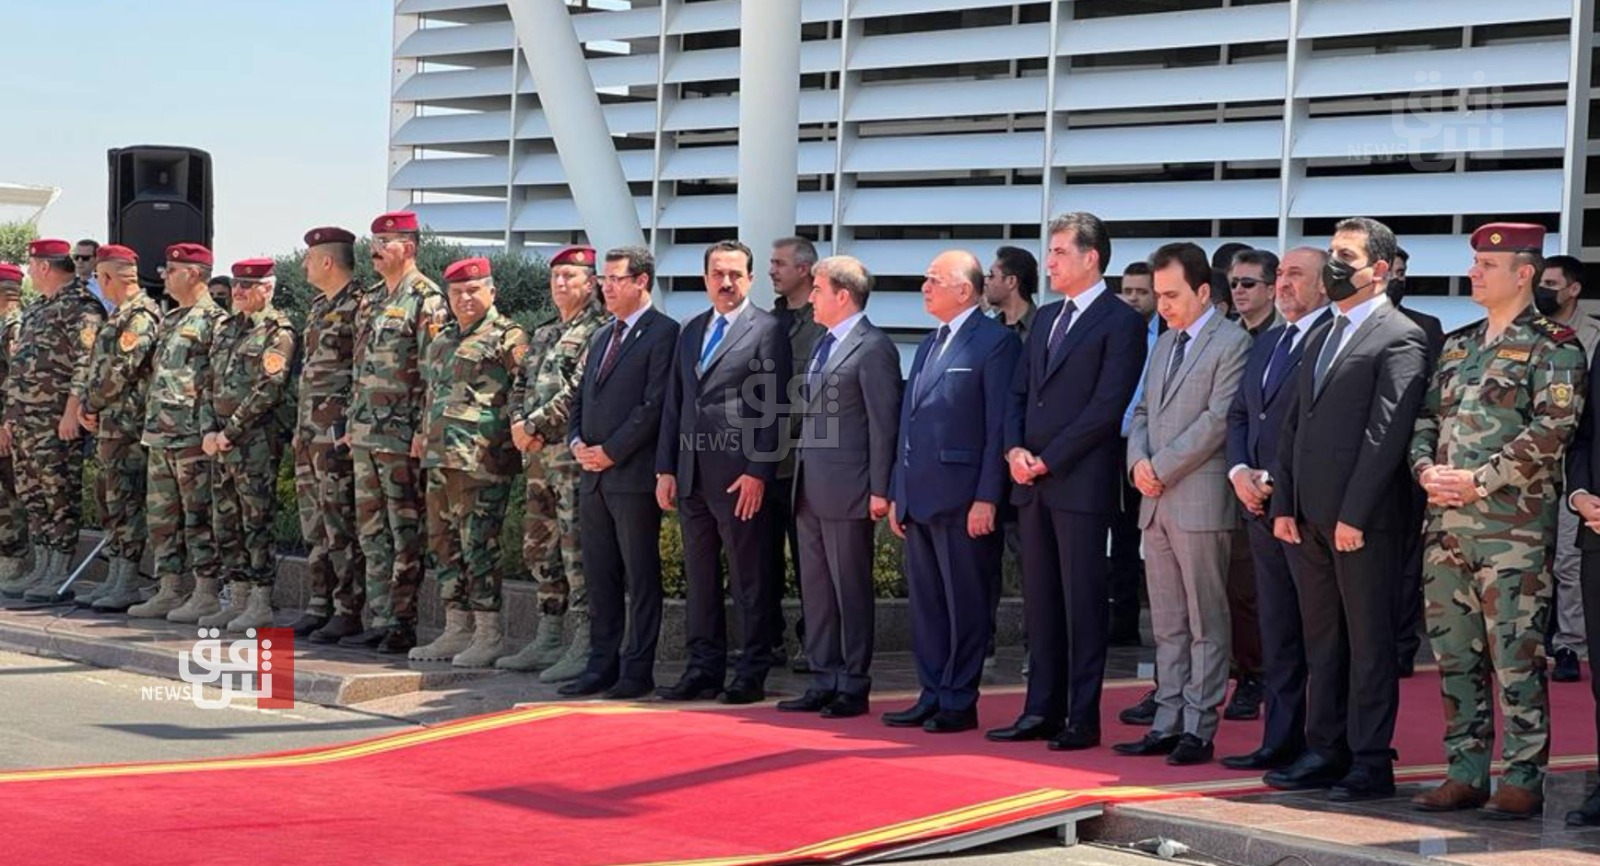 President Barzani receives the bodies of the Zakho attack victims at Erbil airport